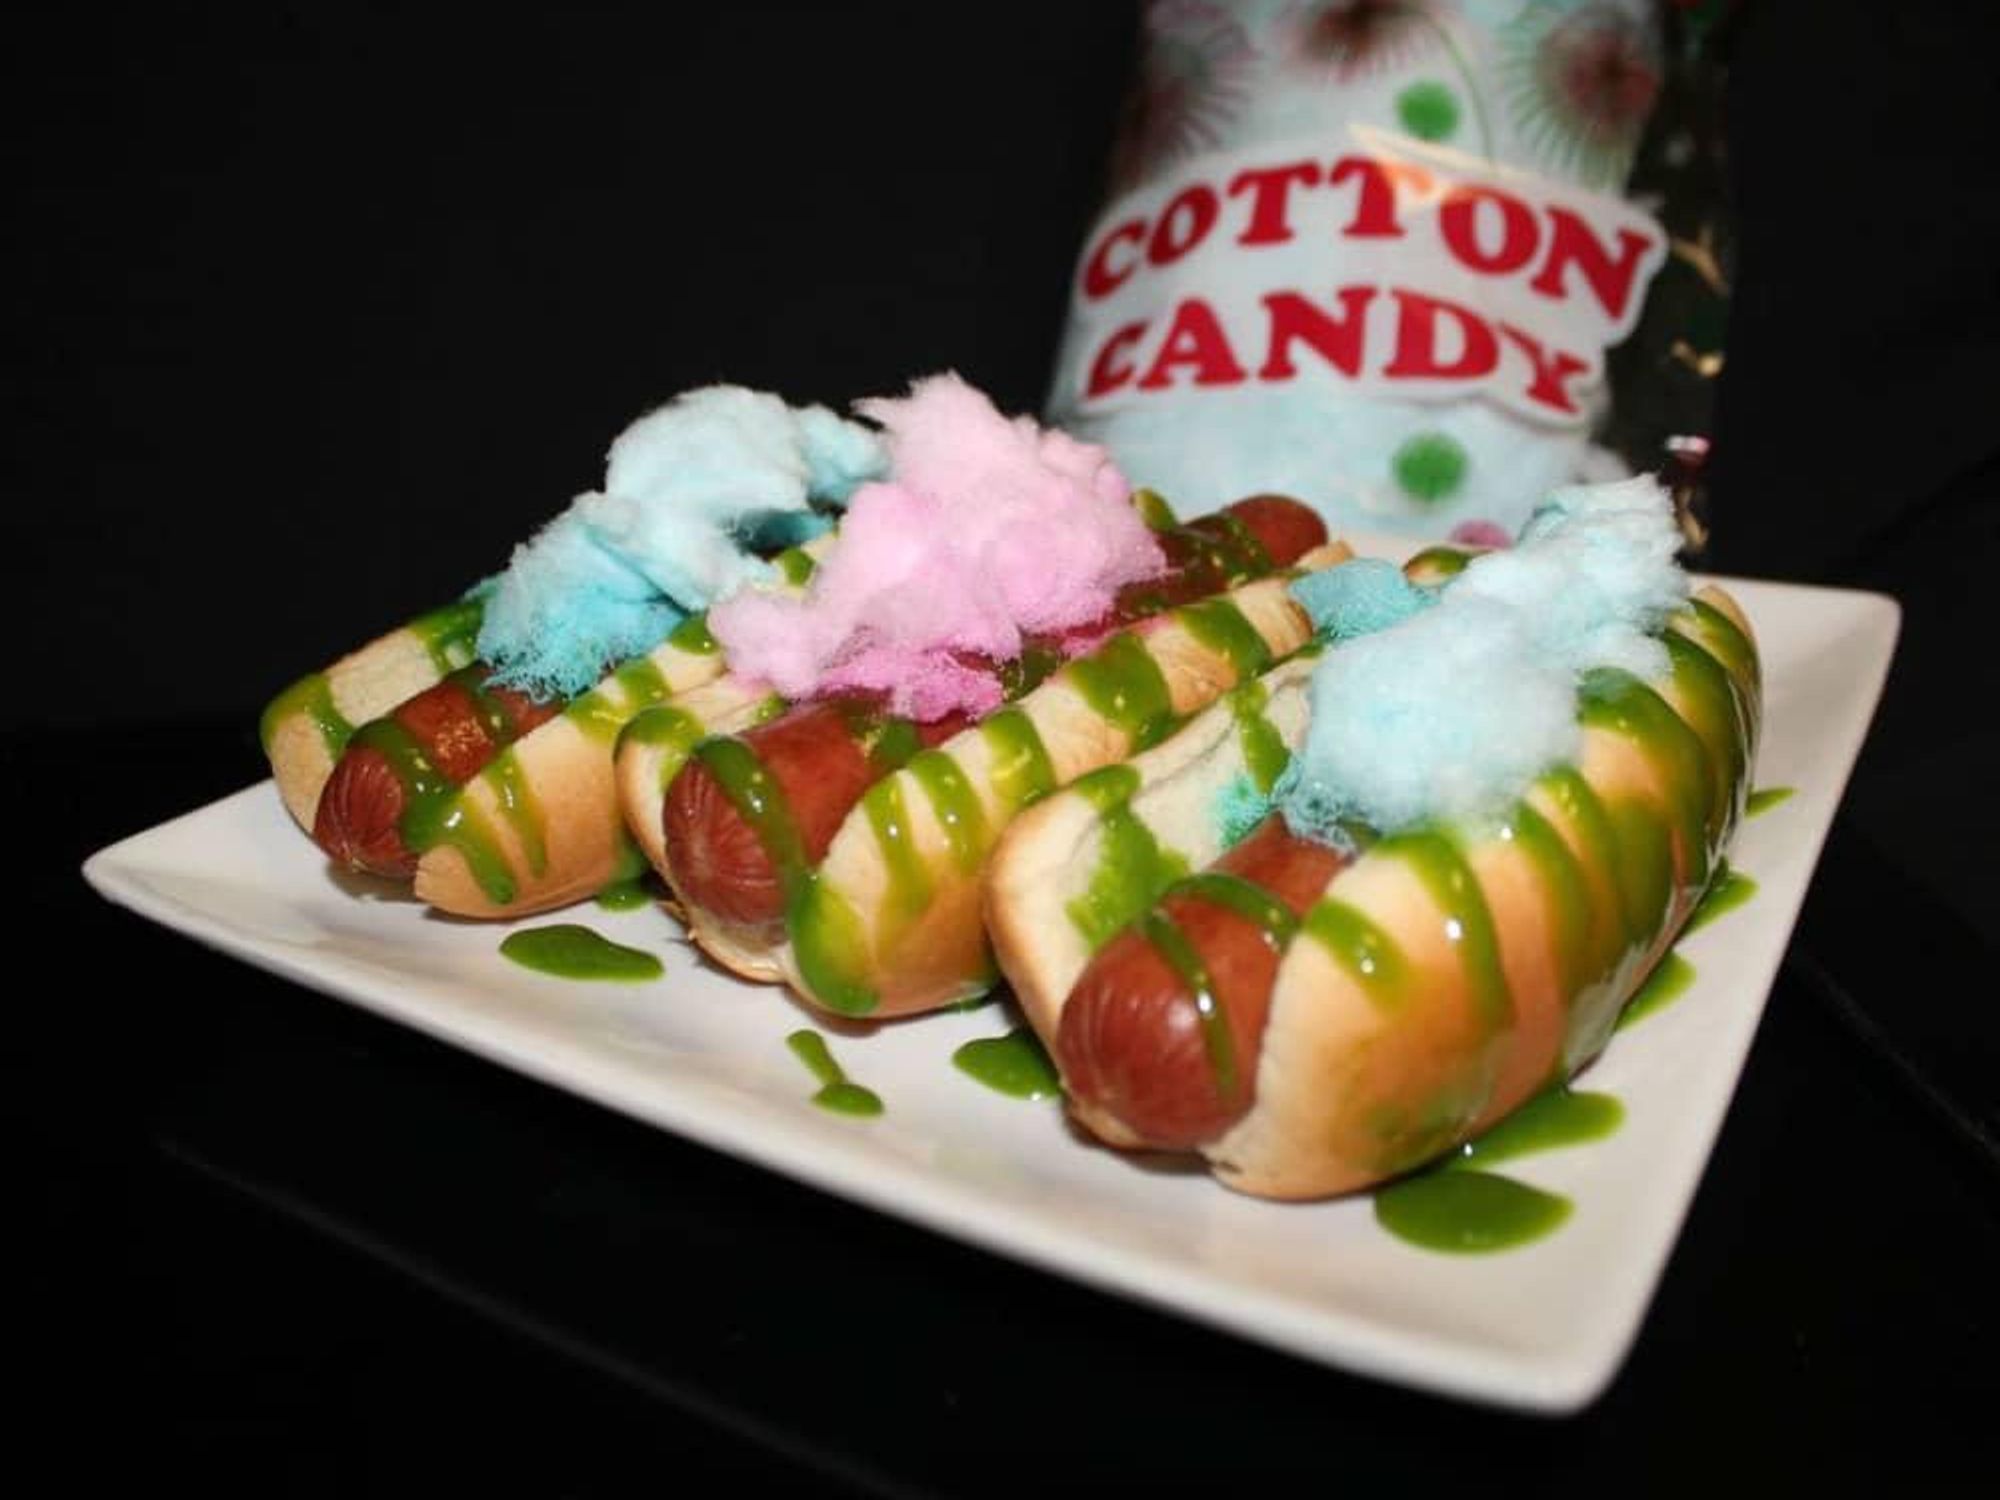 Rangers hot dog cotton candy